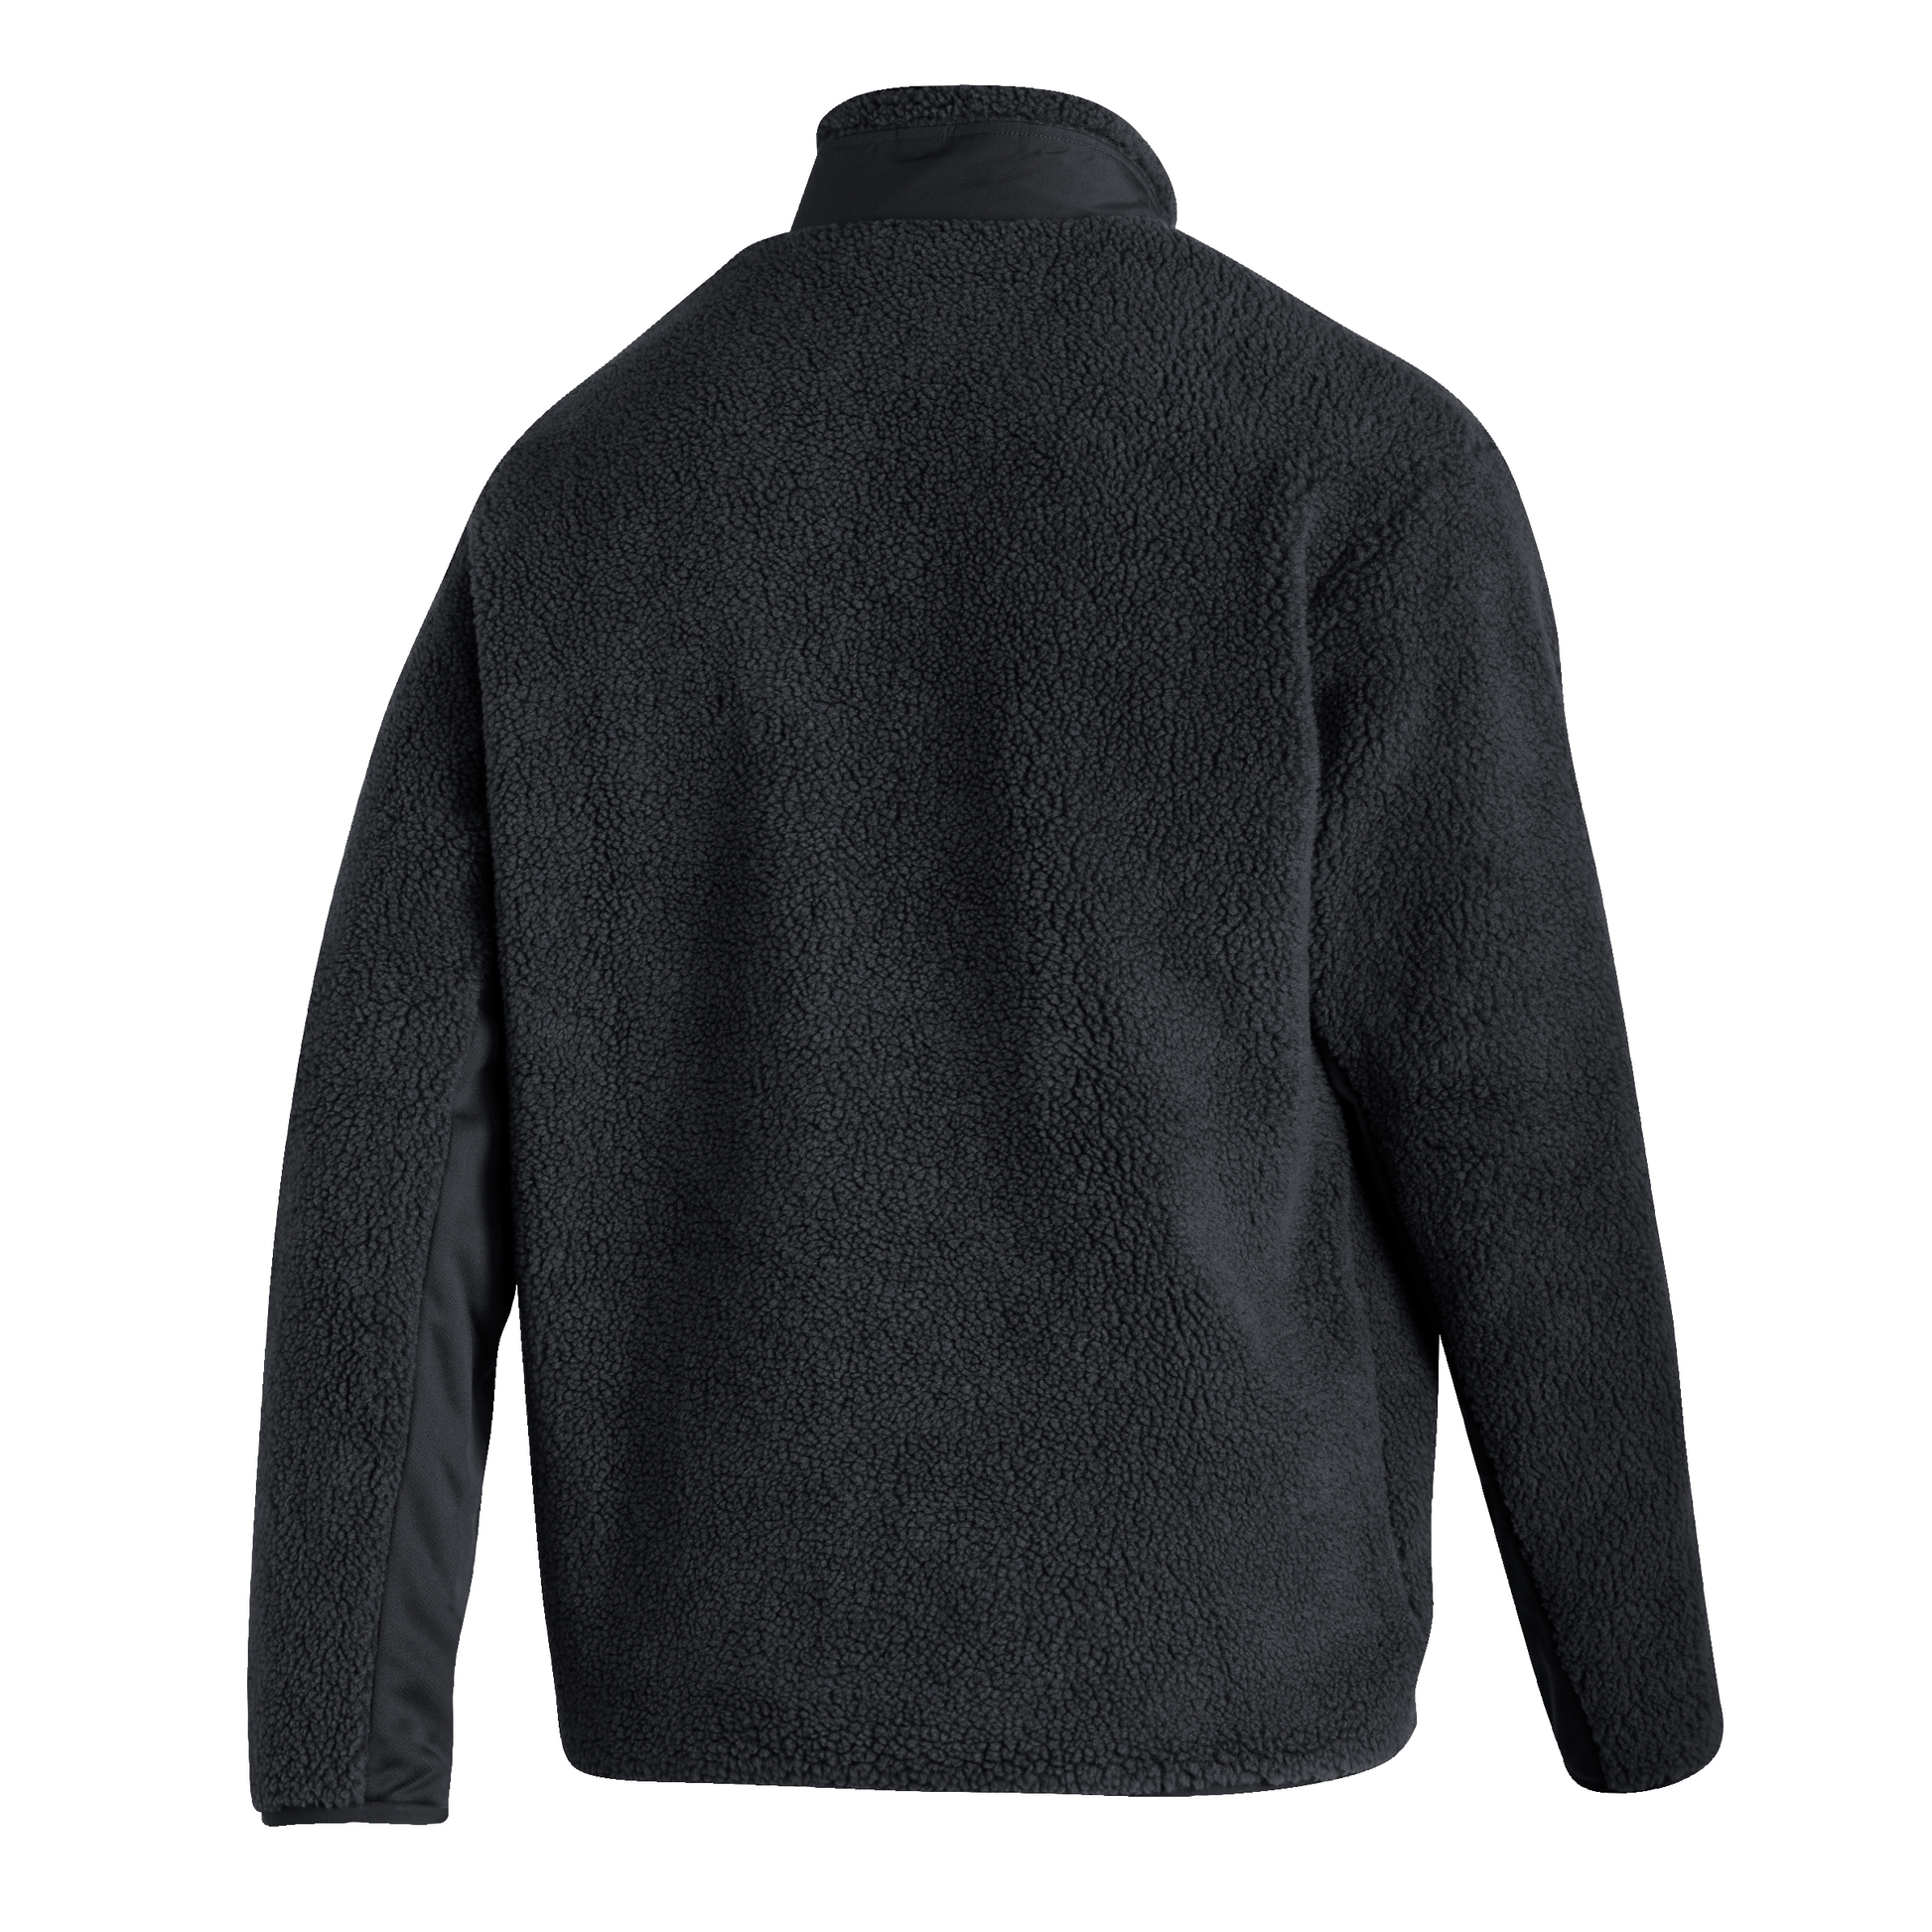 Back View: Black sherpa with no design on back.